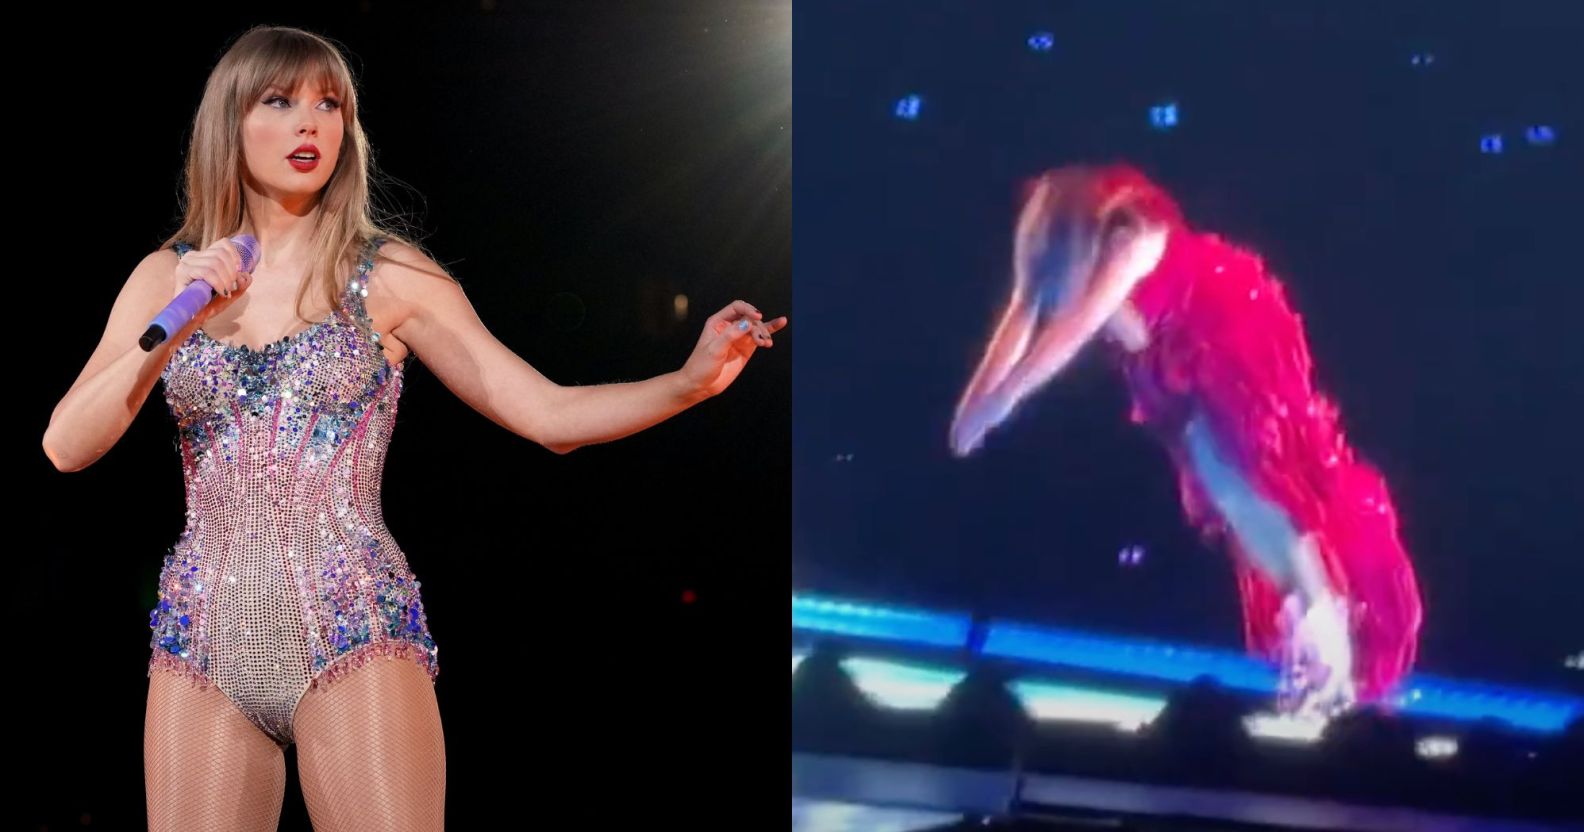 At left, Taylor Swift performs on stage at the Eras Tour. At right, Taylor Swift jumps off the stage at the Eras Tour.